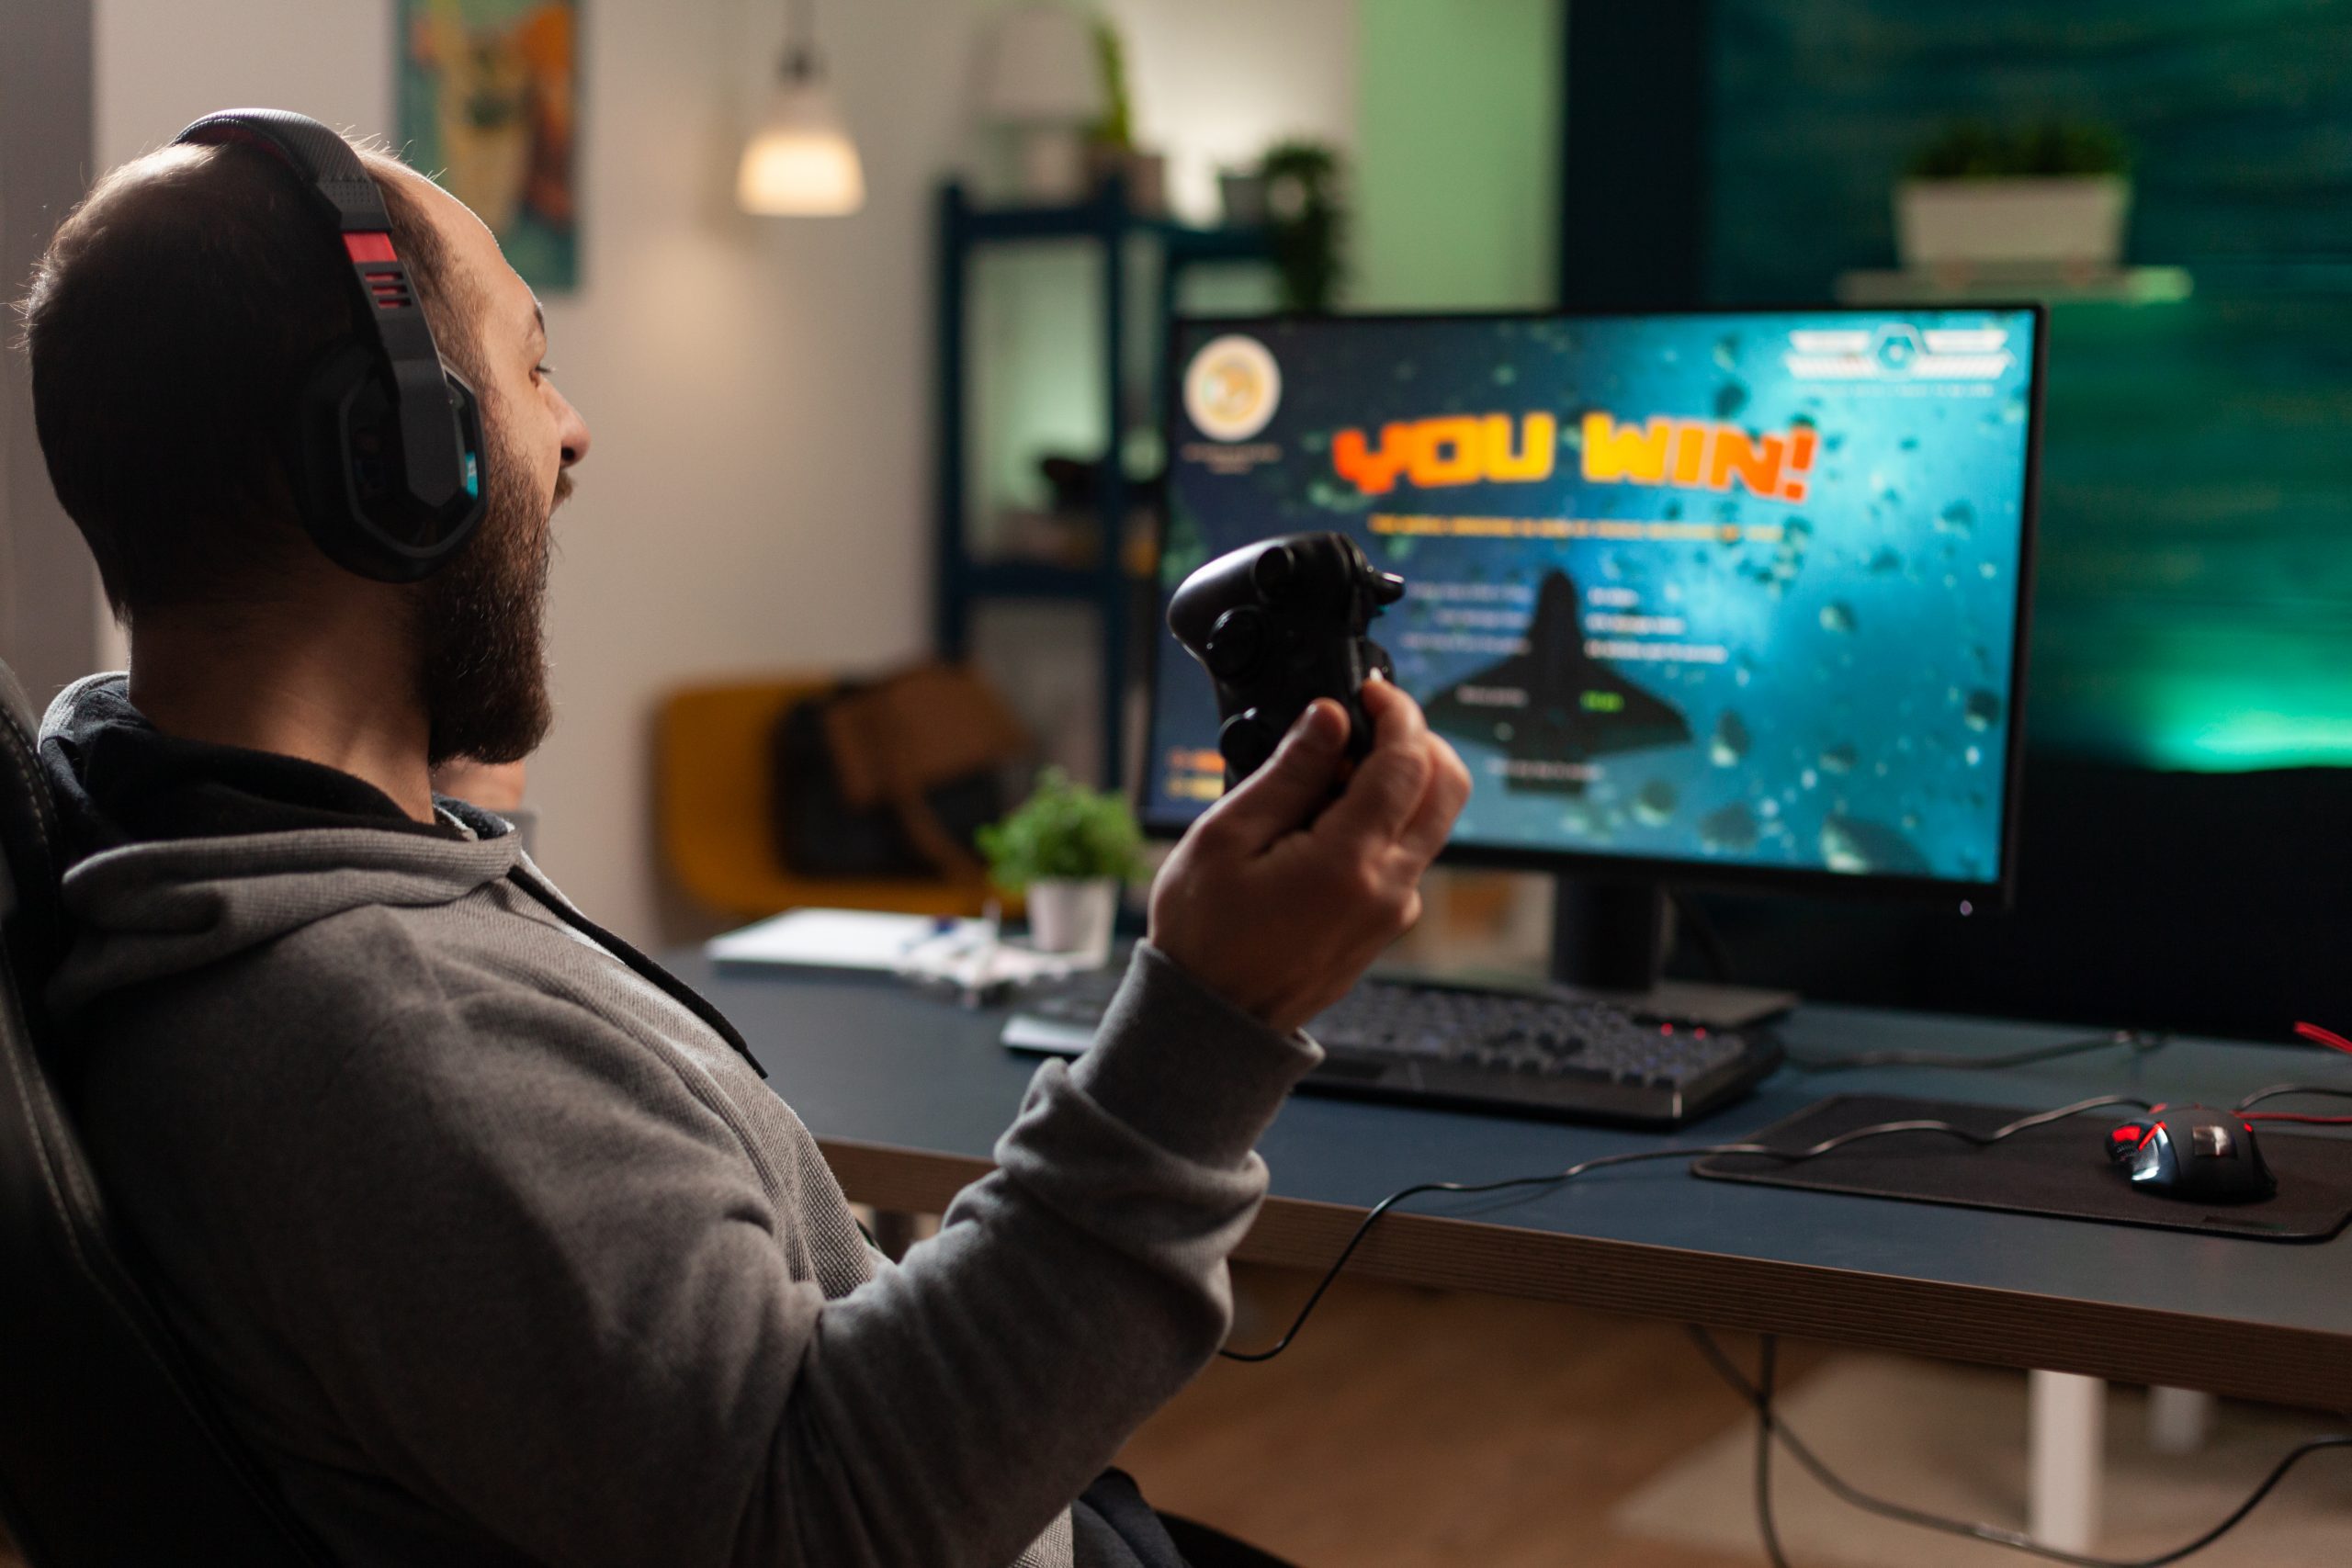 player winning video games with controller and headset in front of monitor man using joystick and headphones playing online games on computer person celebrating game win for leisure scaled